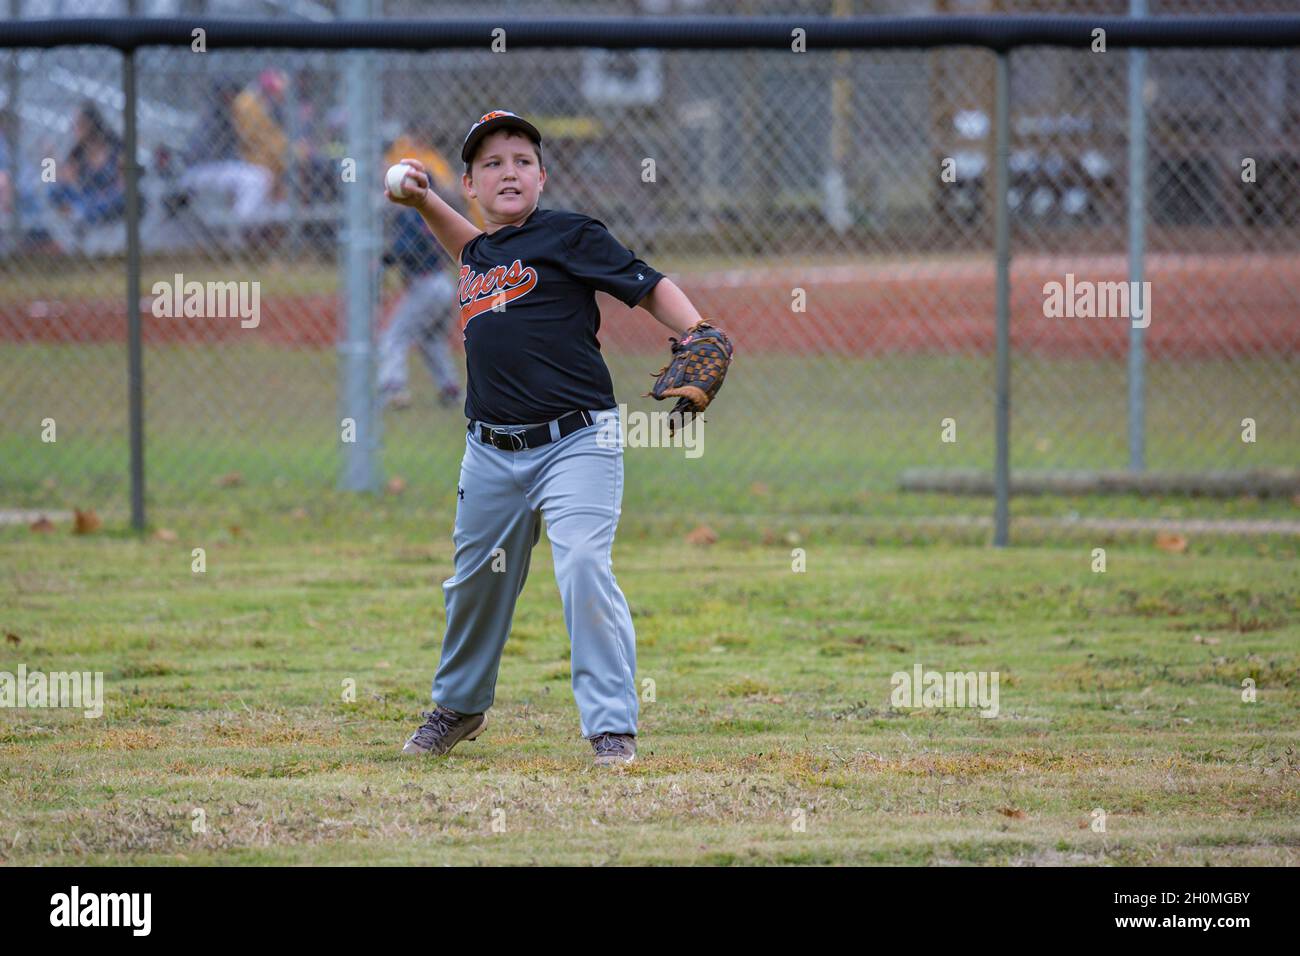 Young pre-teen male playing baseball in uniform Stock Photo